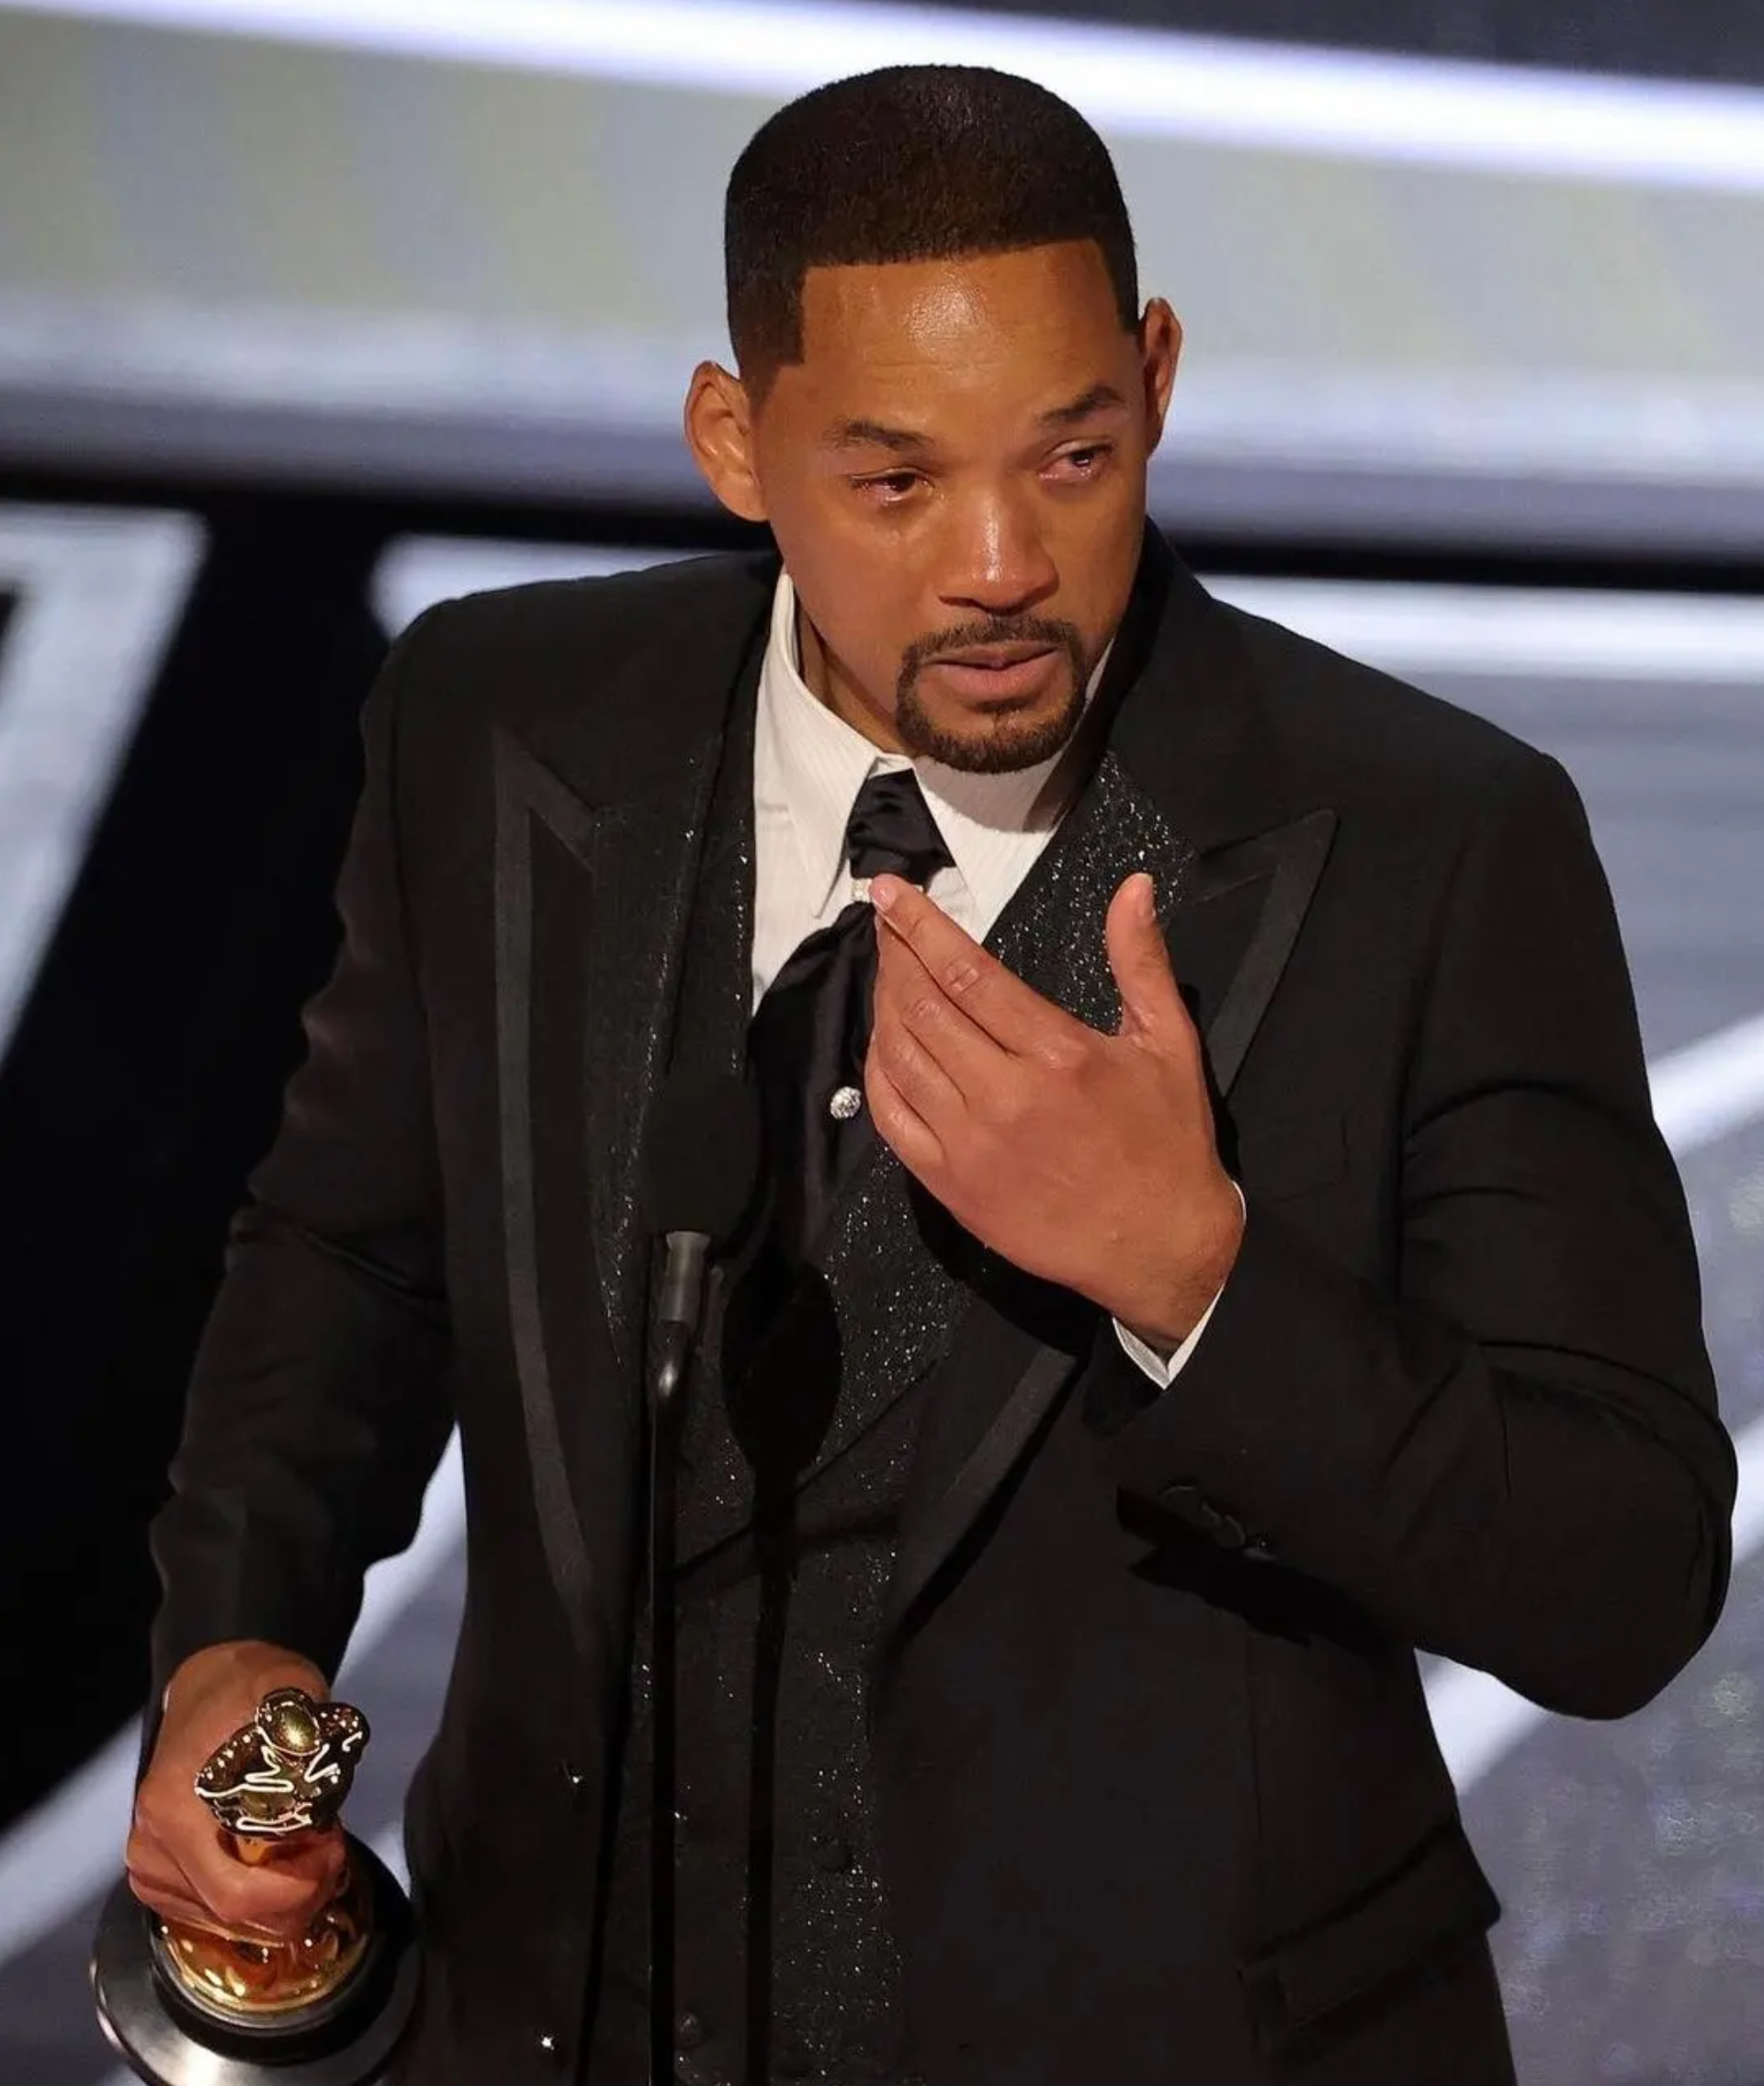 Will Smith wins Best Actor at Oscars 2022